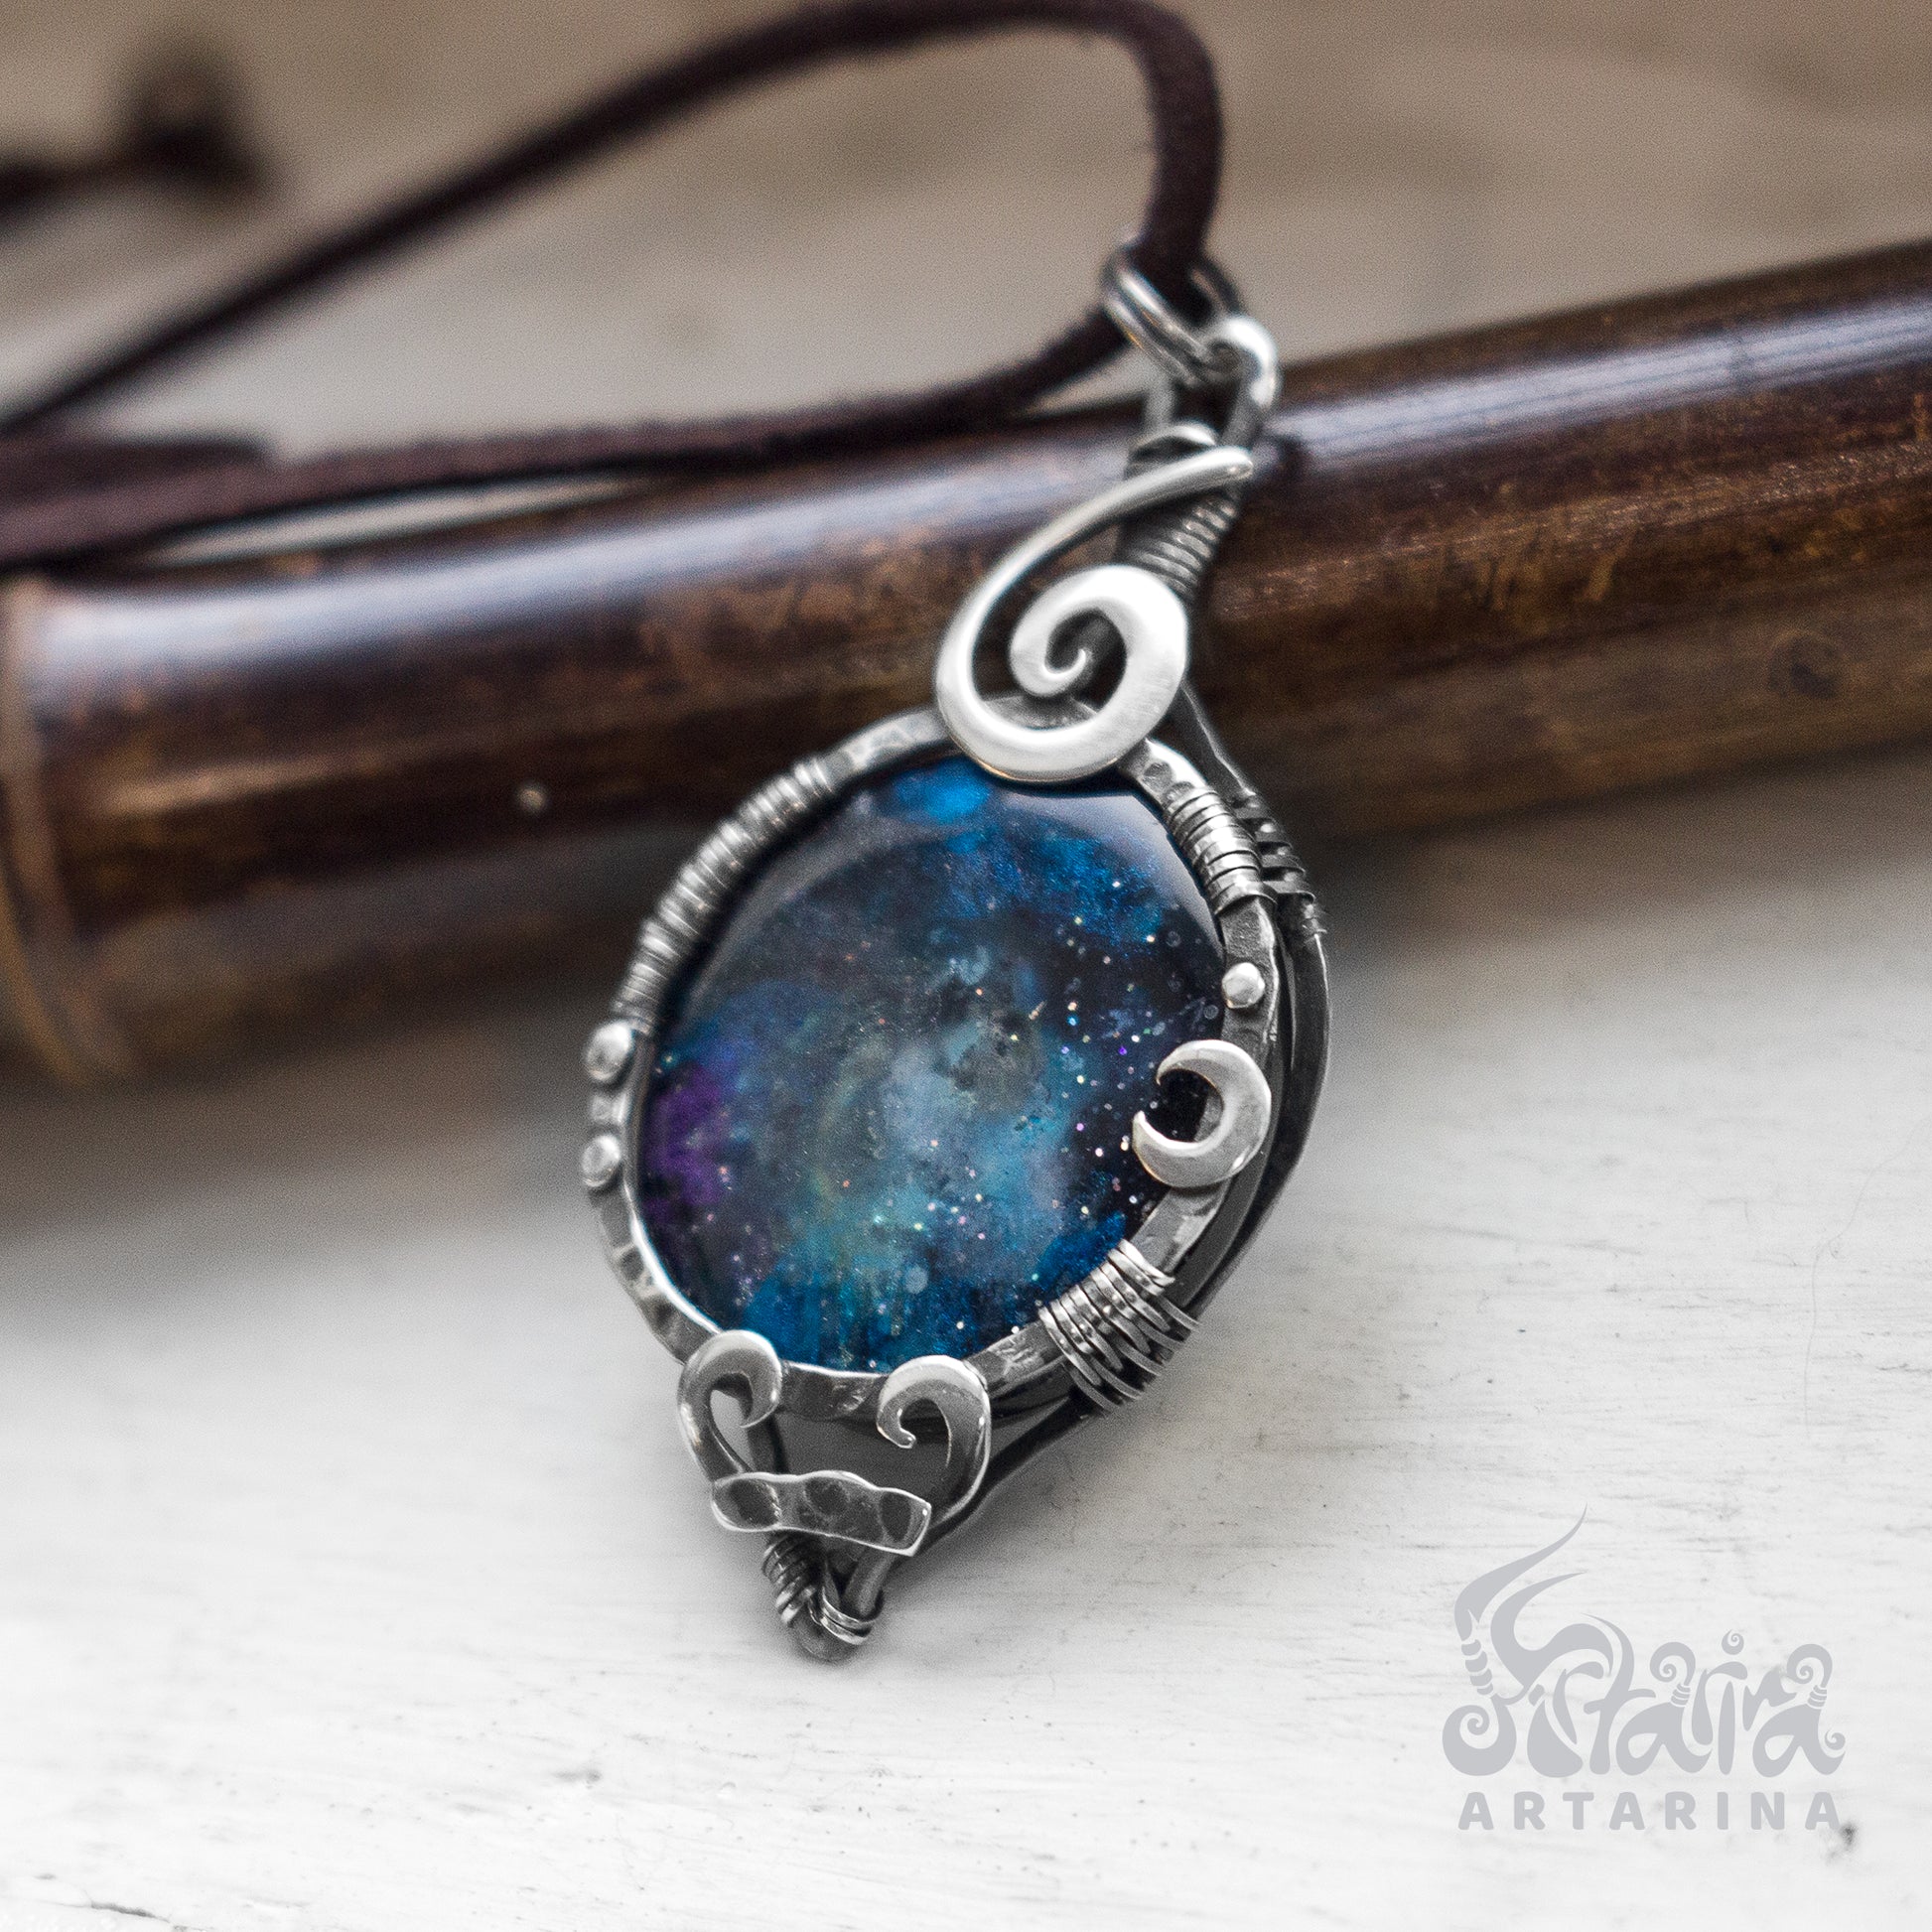 Handmade silver pendant with a cosmic stellar nebula design and a hand-painted night sky epoxy resin cabochon. pic 4